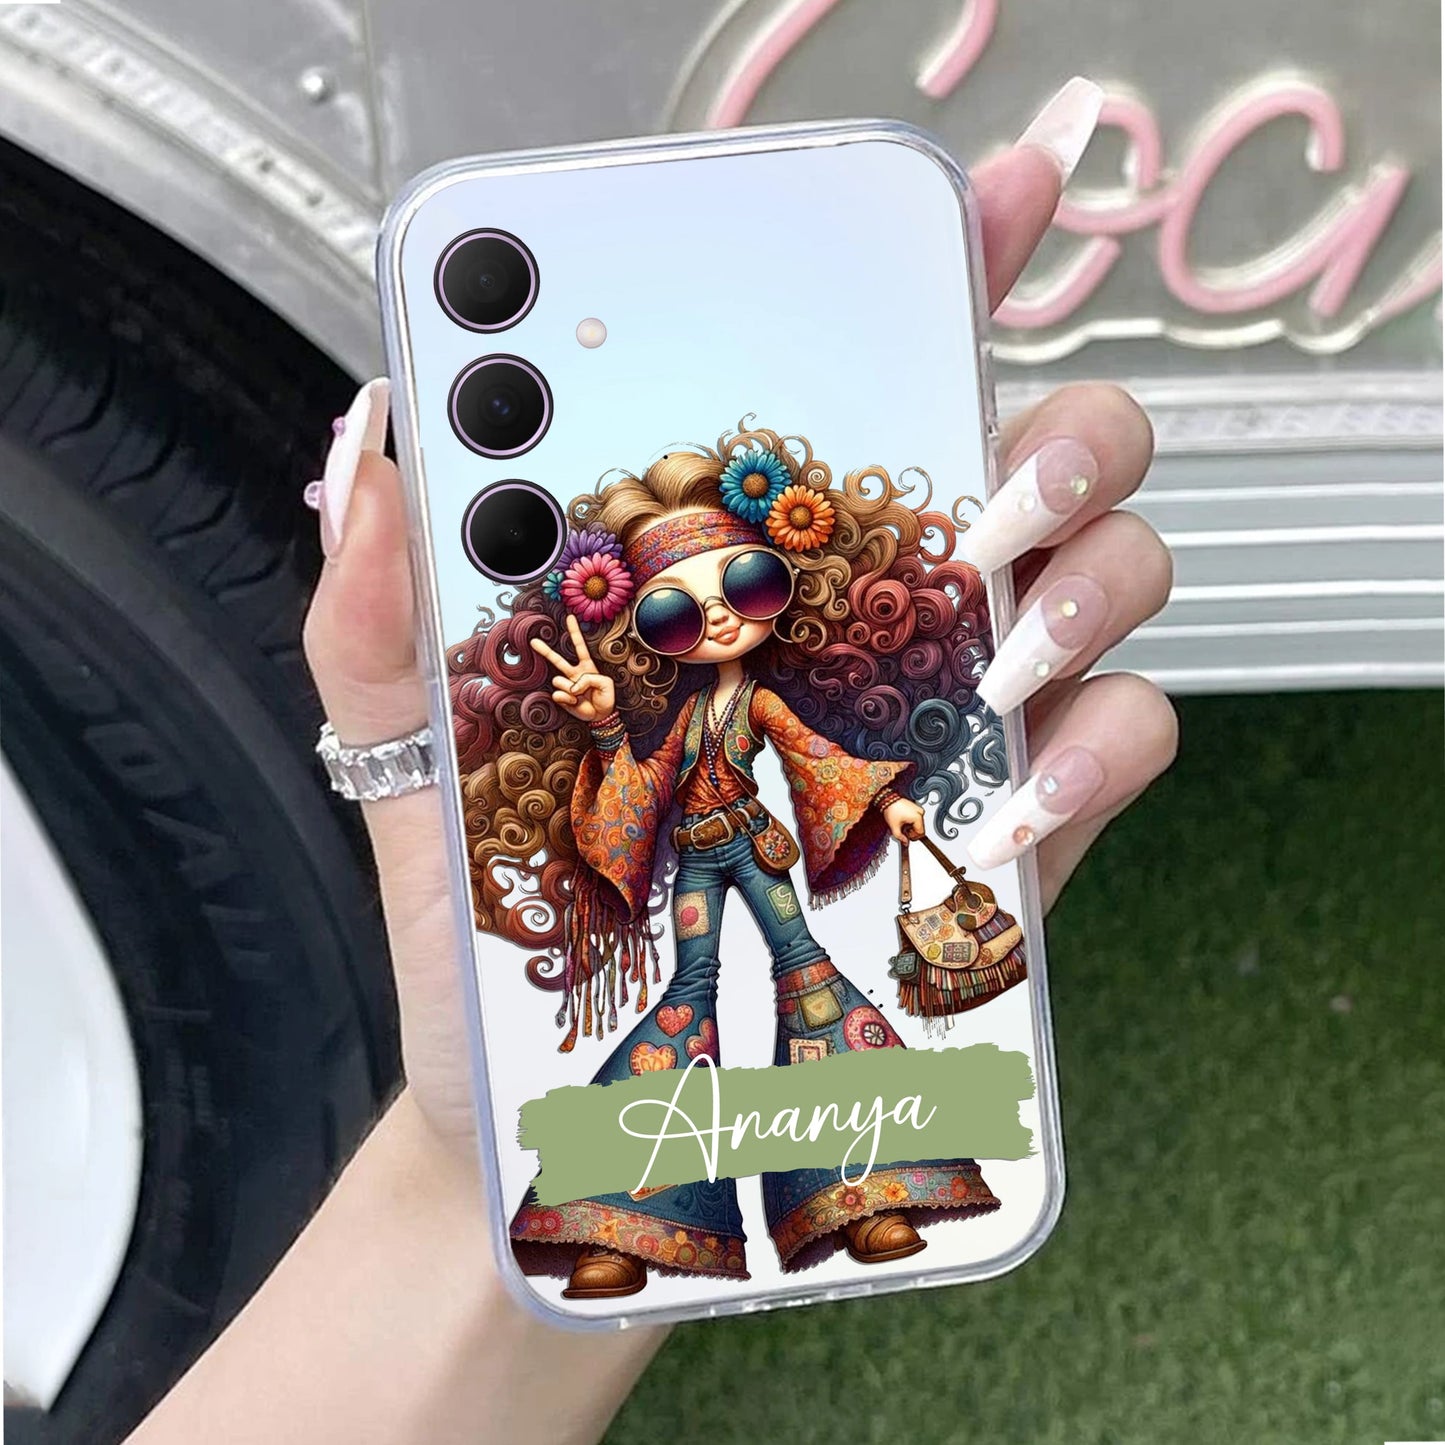 Ranngers Girl Customize Transparent Silicon Case For Samsung